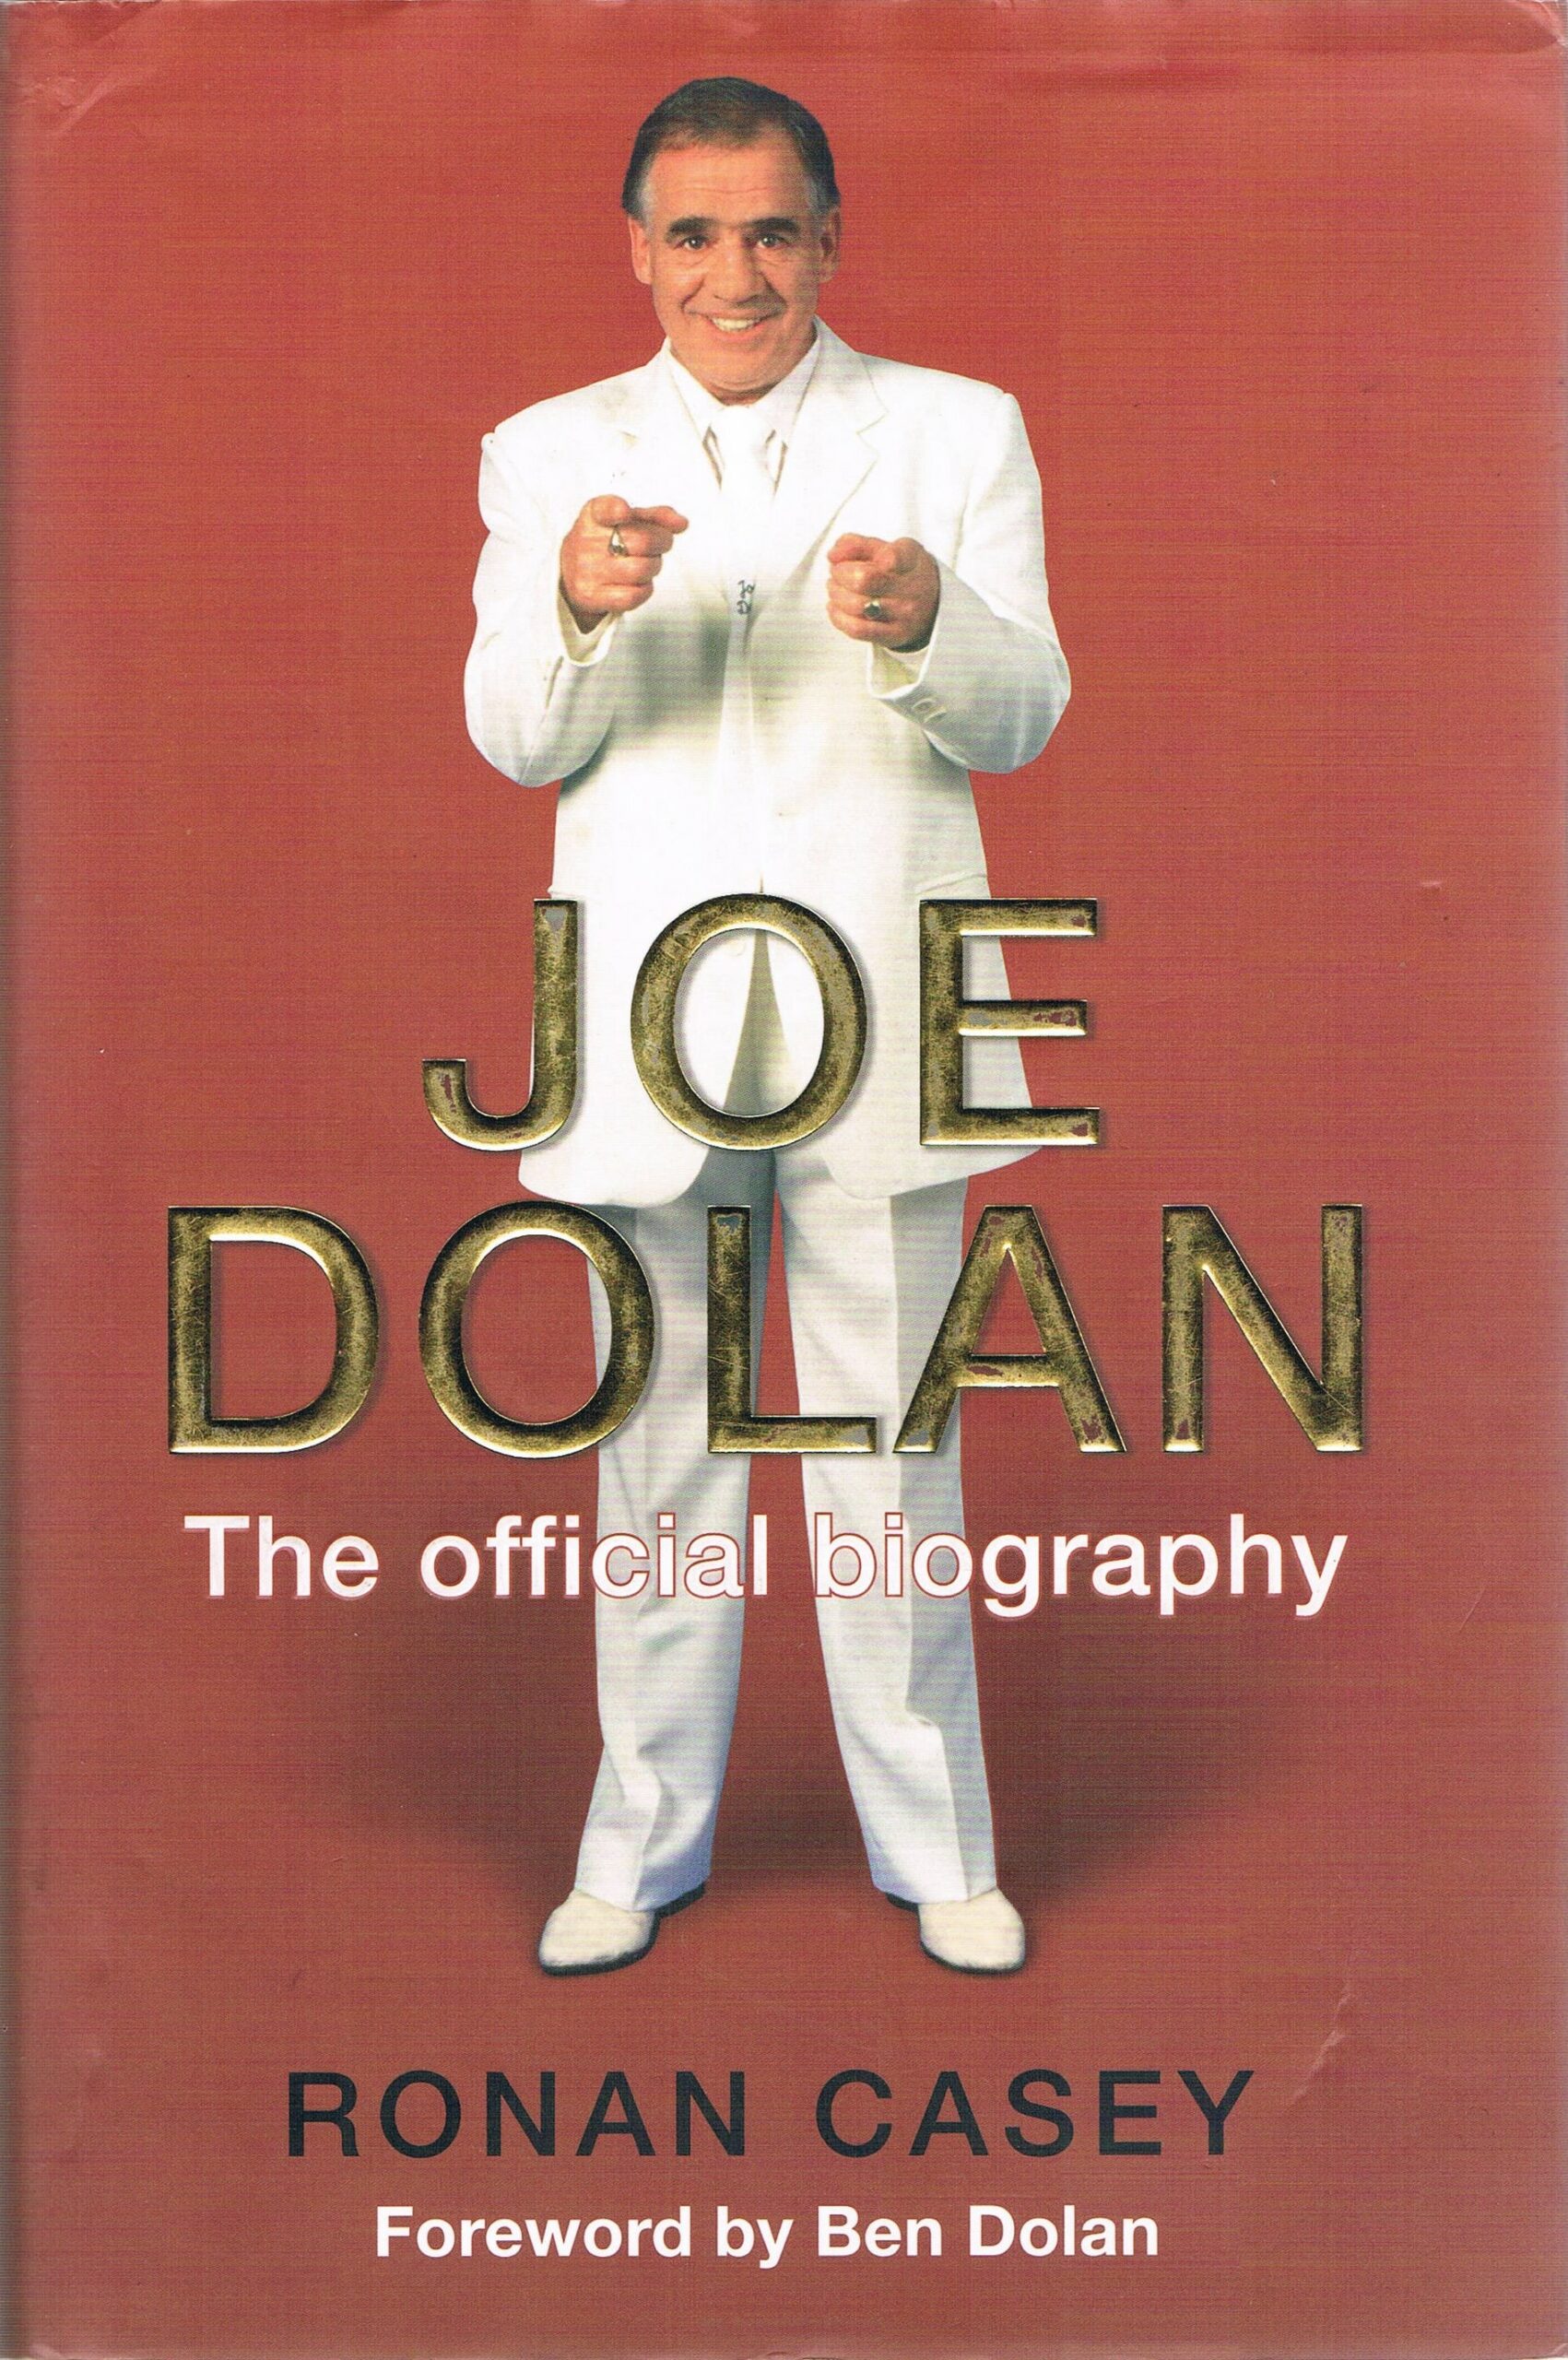 Joe Dolan, The Official Biography [Signed] by Ronan Casey